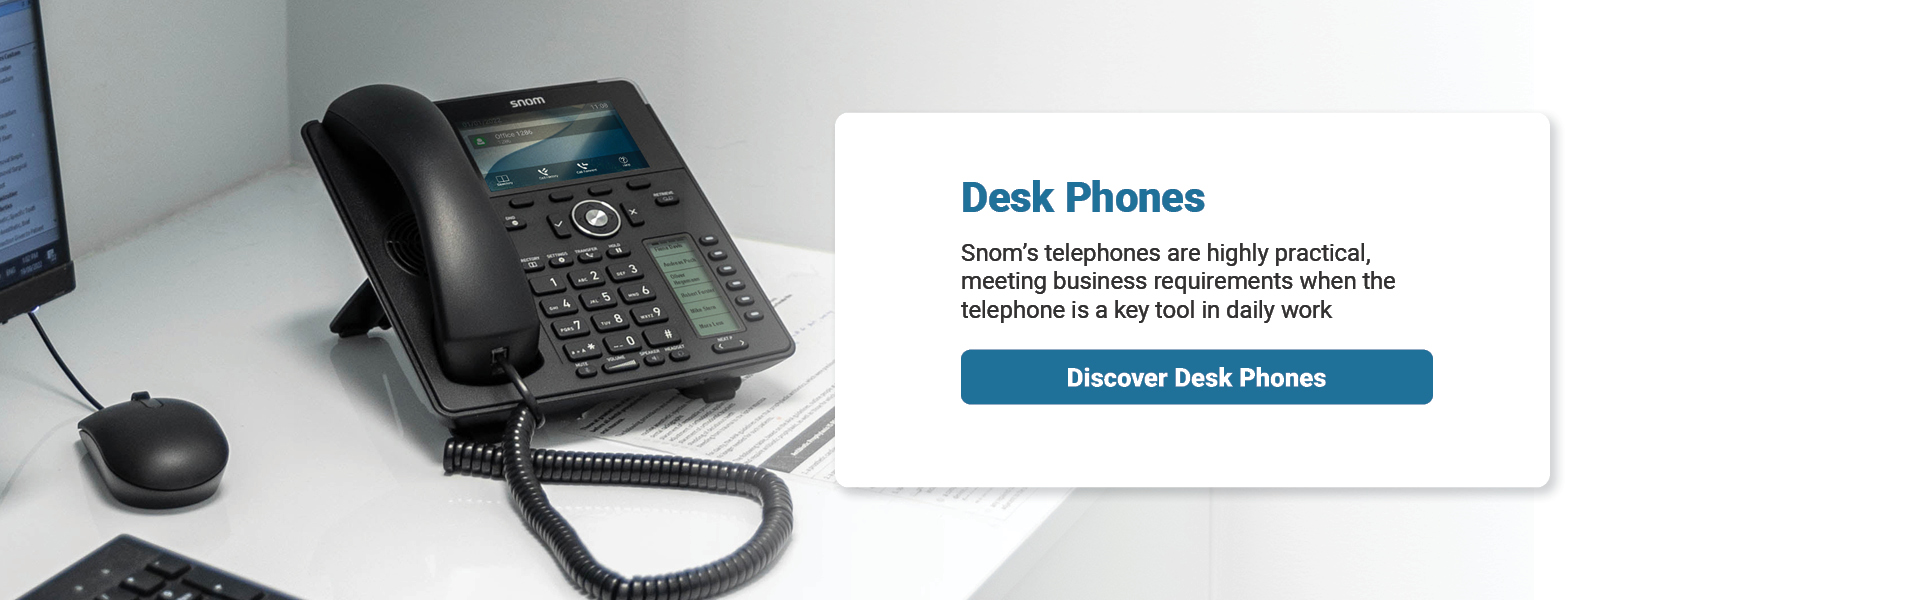 Desk Phones | Snom's telephones are highly practical, meeting business requirements when the telephone is a key tool in daily work | Discover Desk Phones